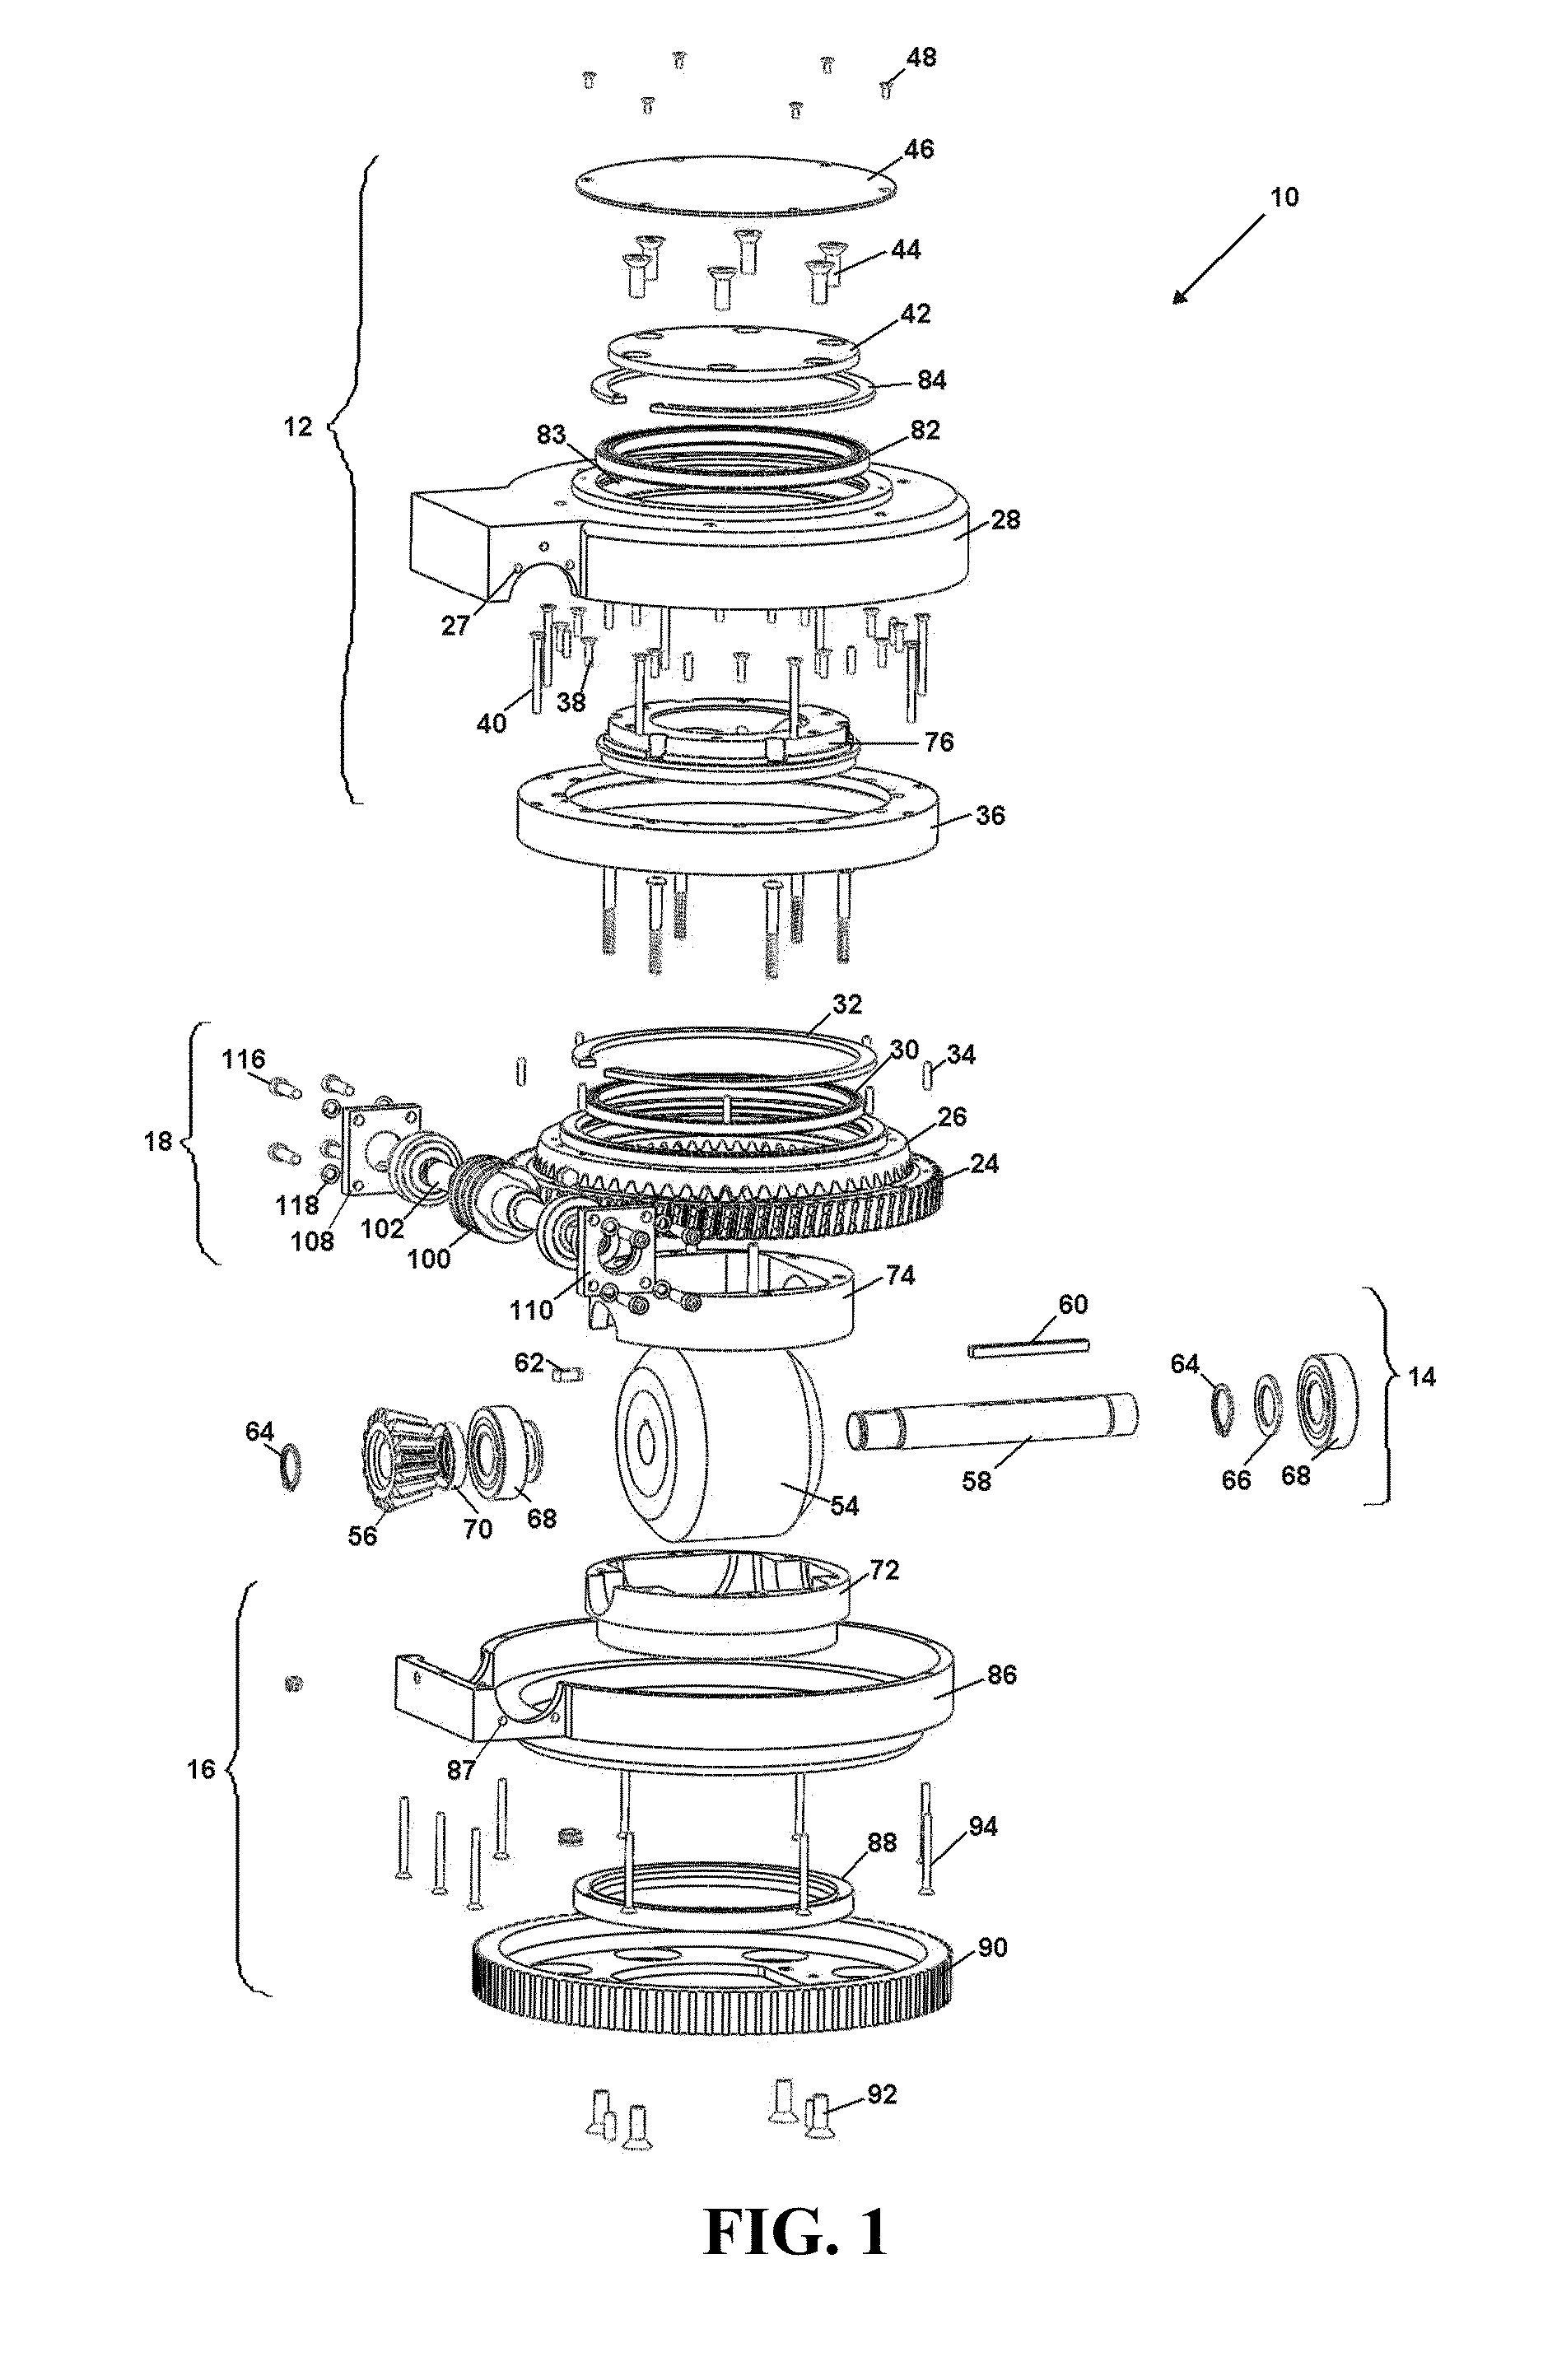 Omnidirectional drive and steering unit